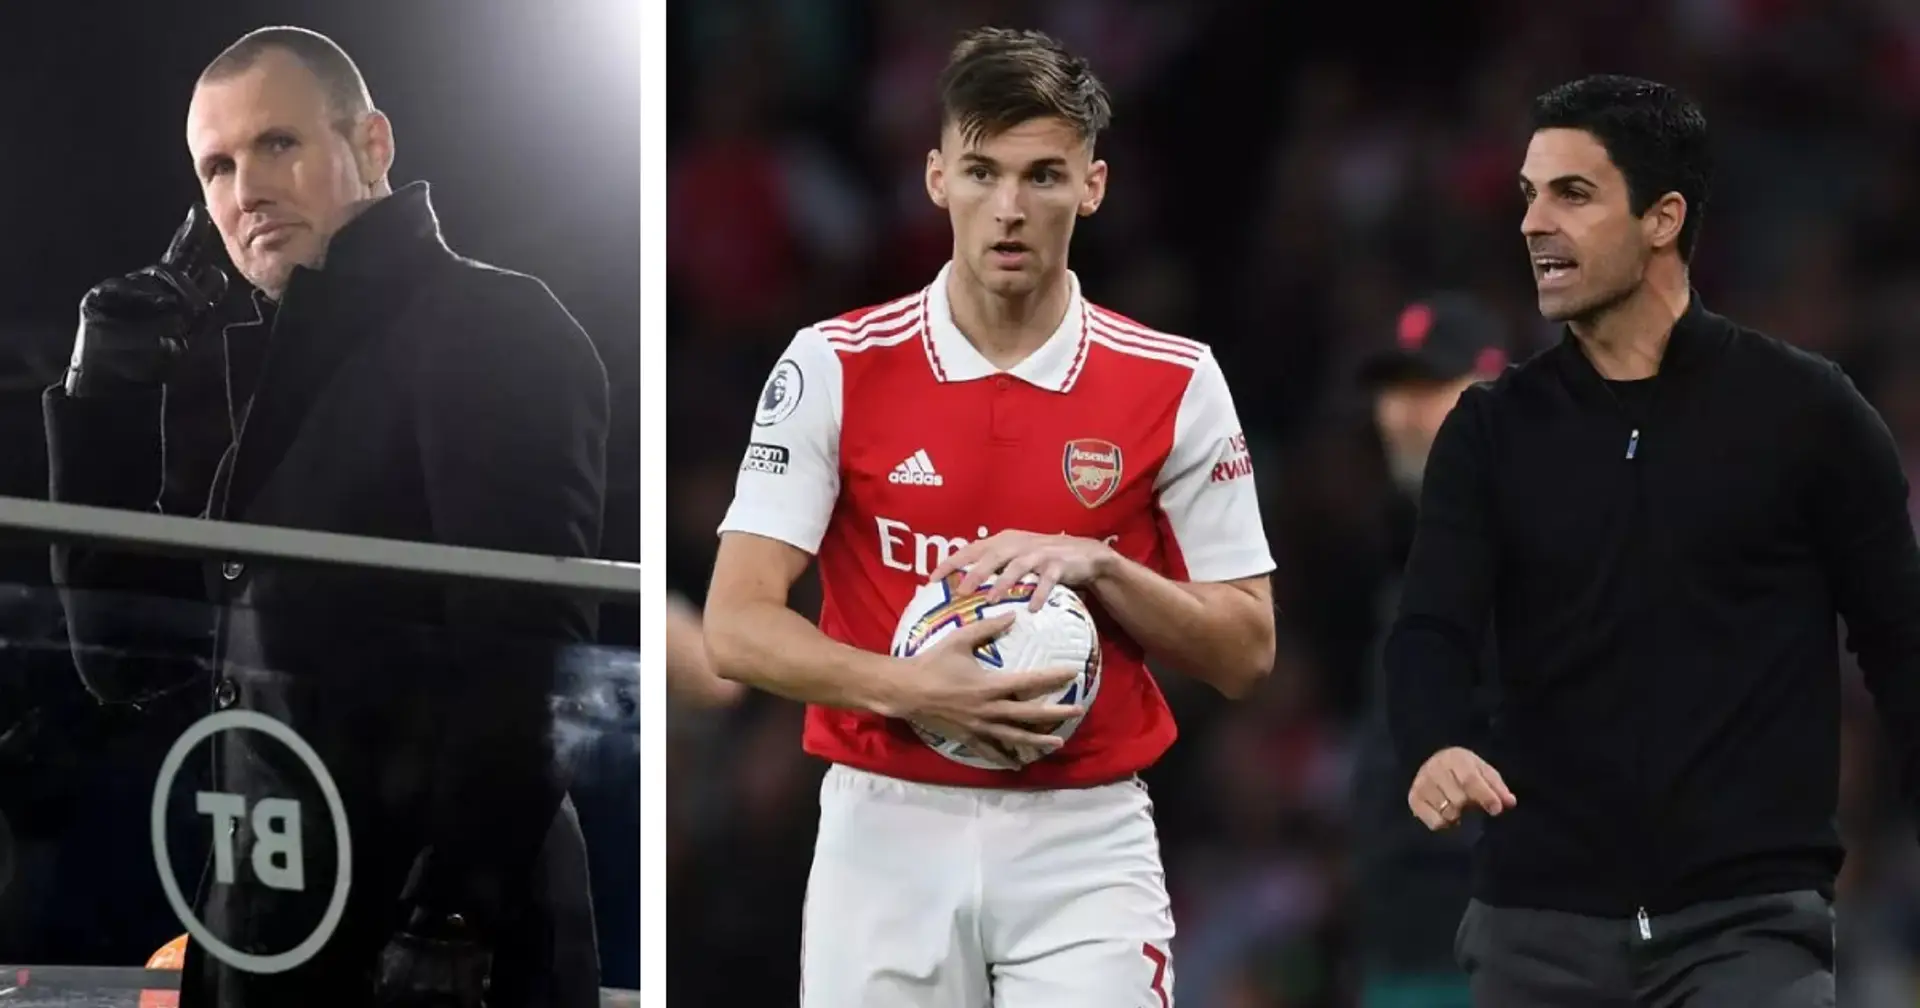 'Too good to sit on the bench for Arteta': ex-Scotland international tells Tierney to leave Arsenal